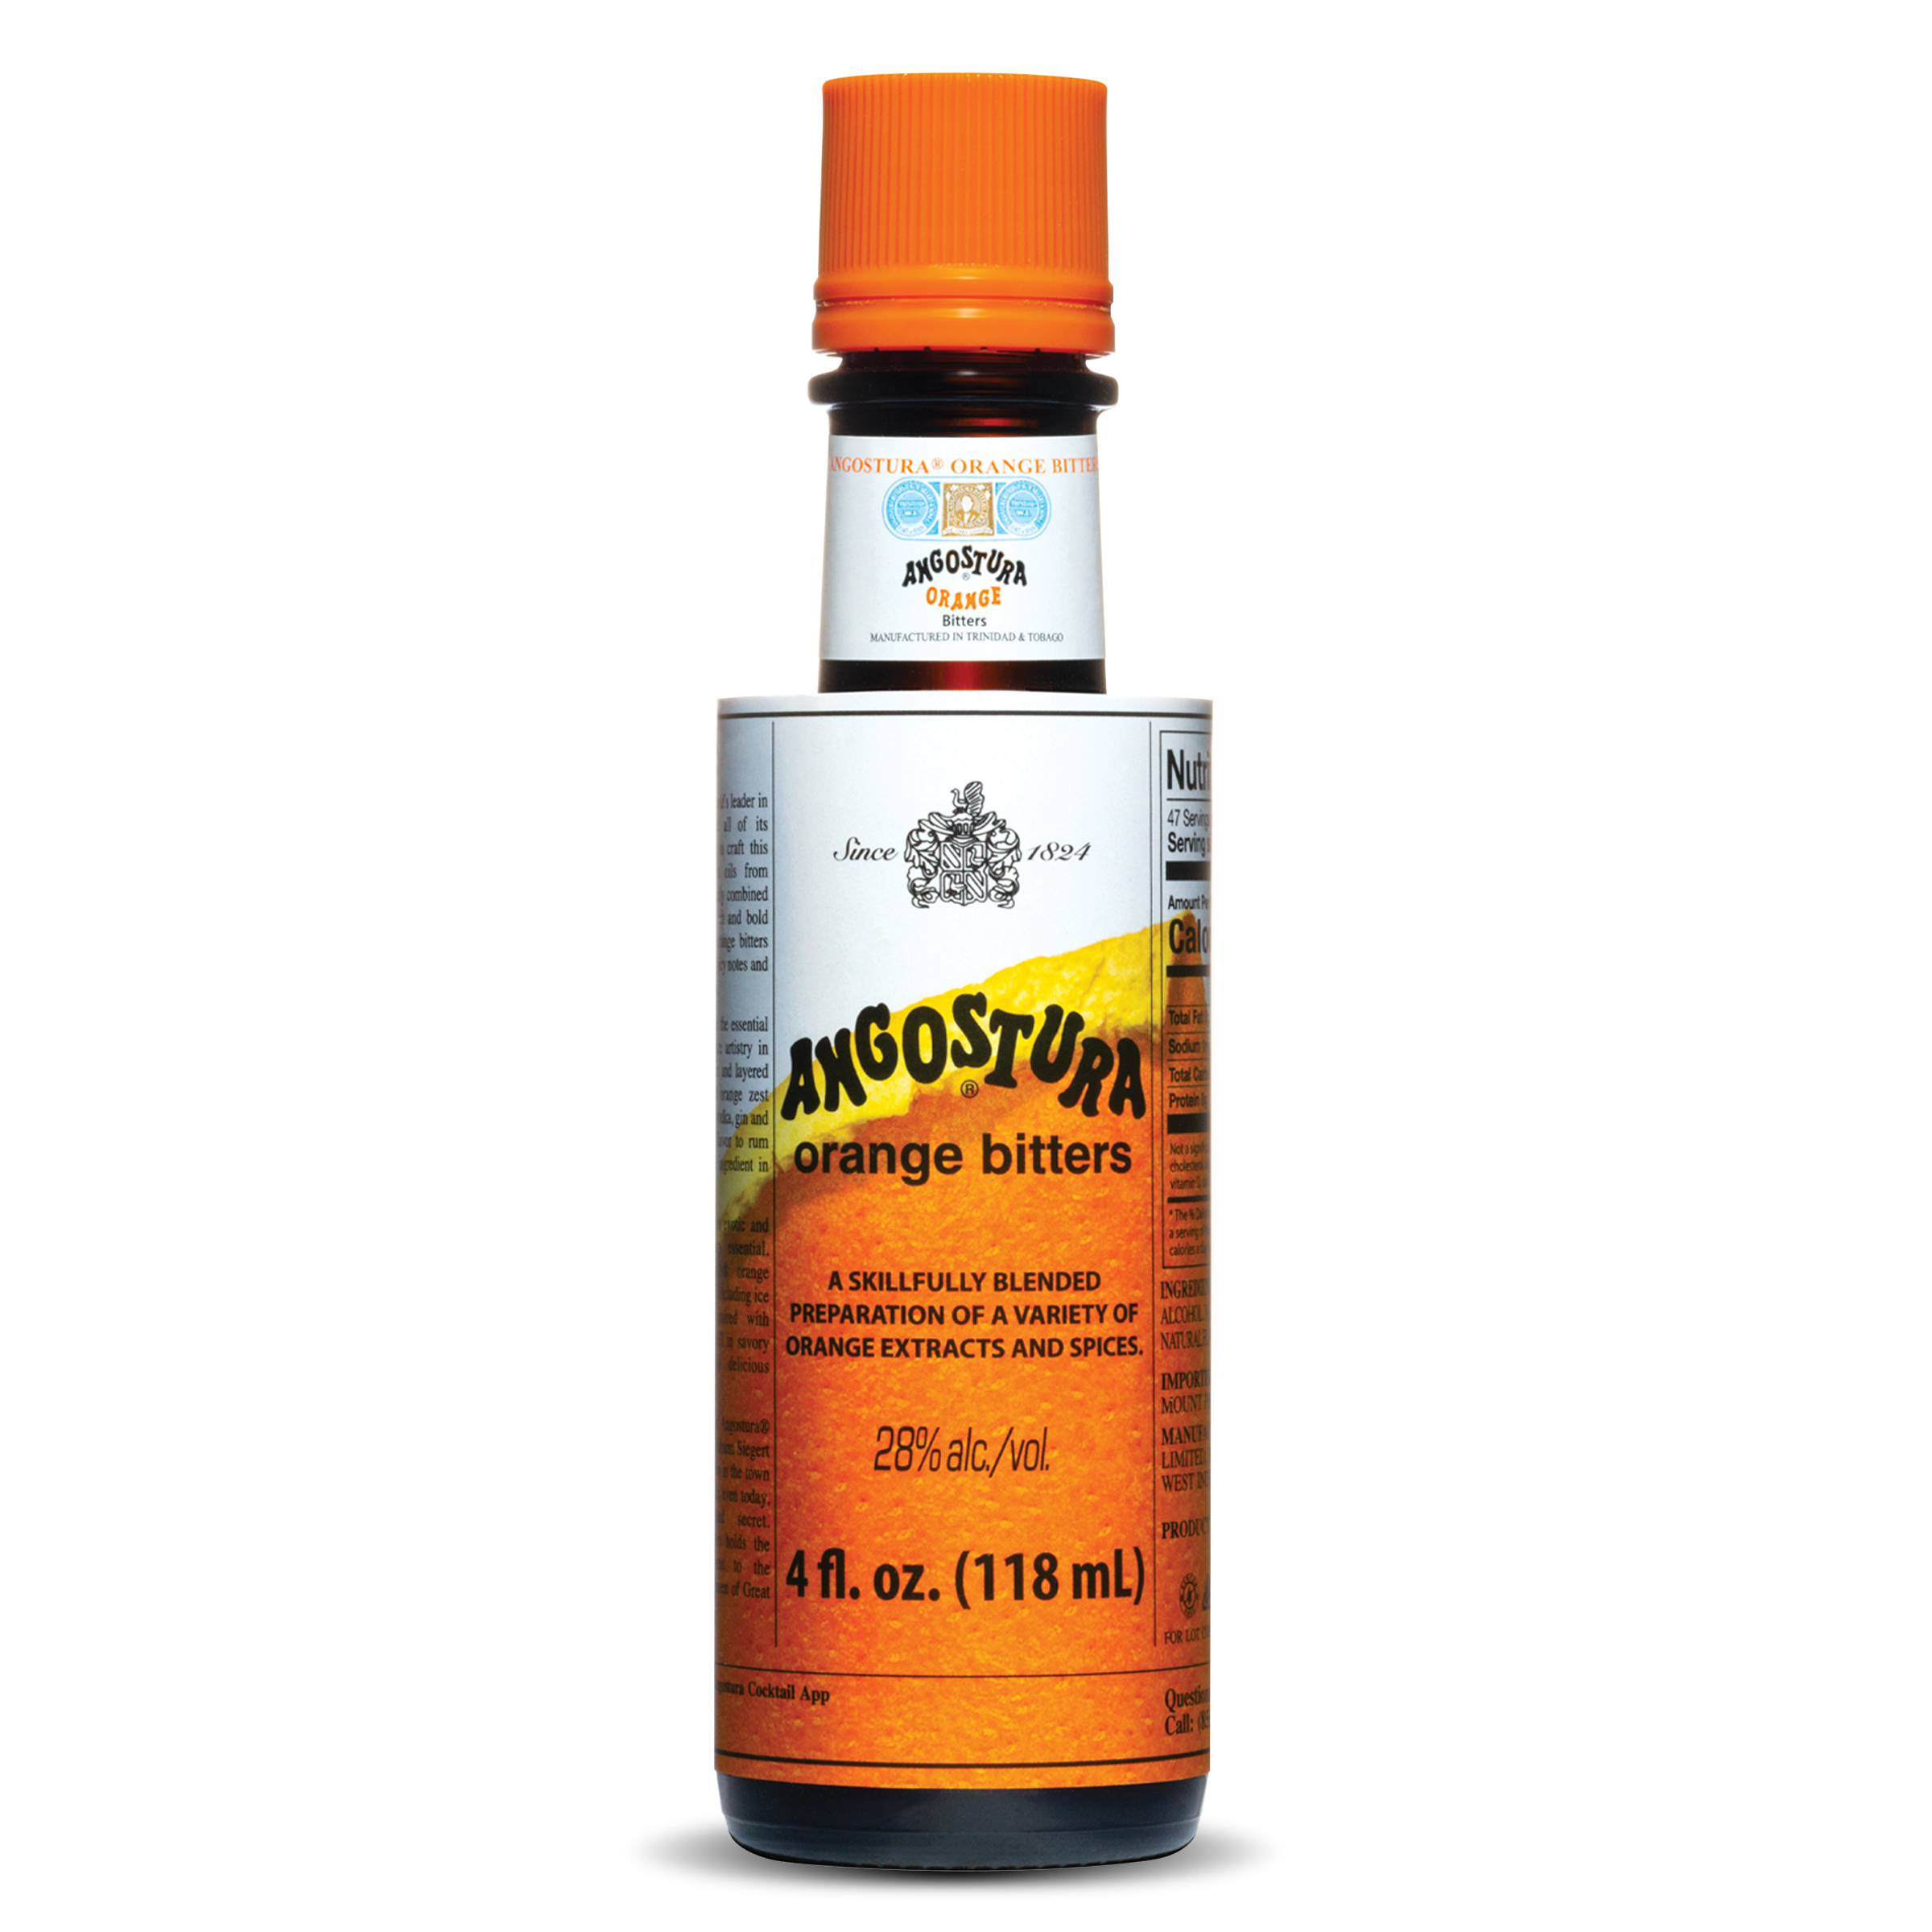 ANGOSTURA Orange Bitters, Cocktail Bitters for Professional and Home Mixologists, 4 fl oz - image 1 of 11